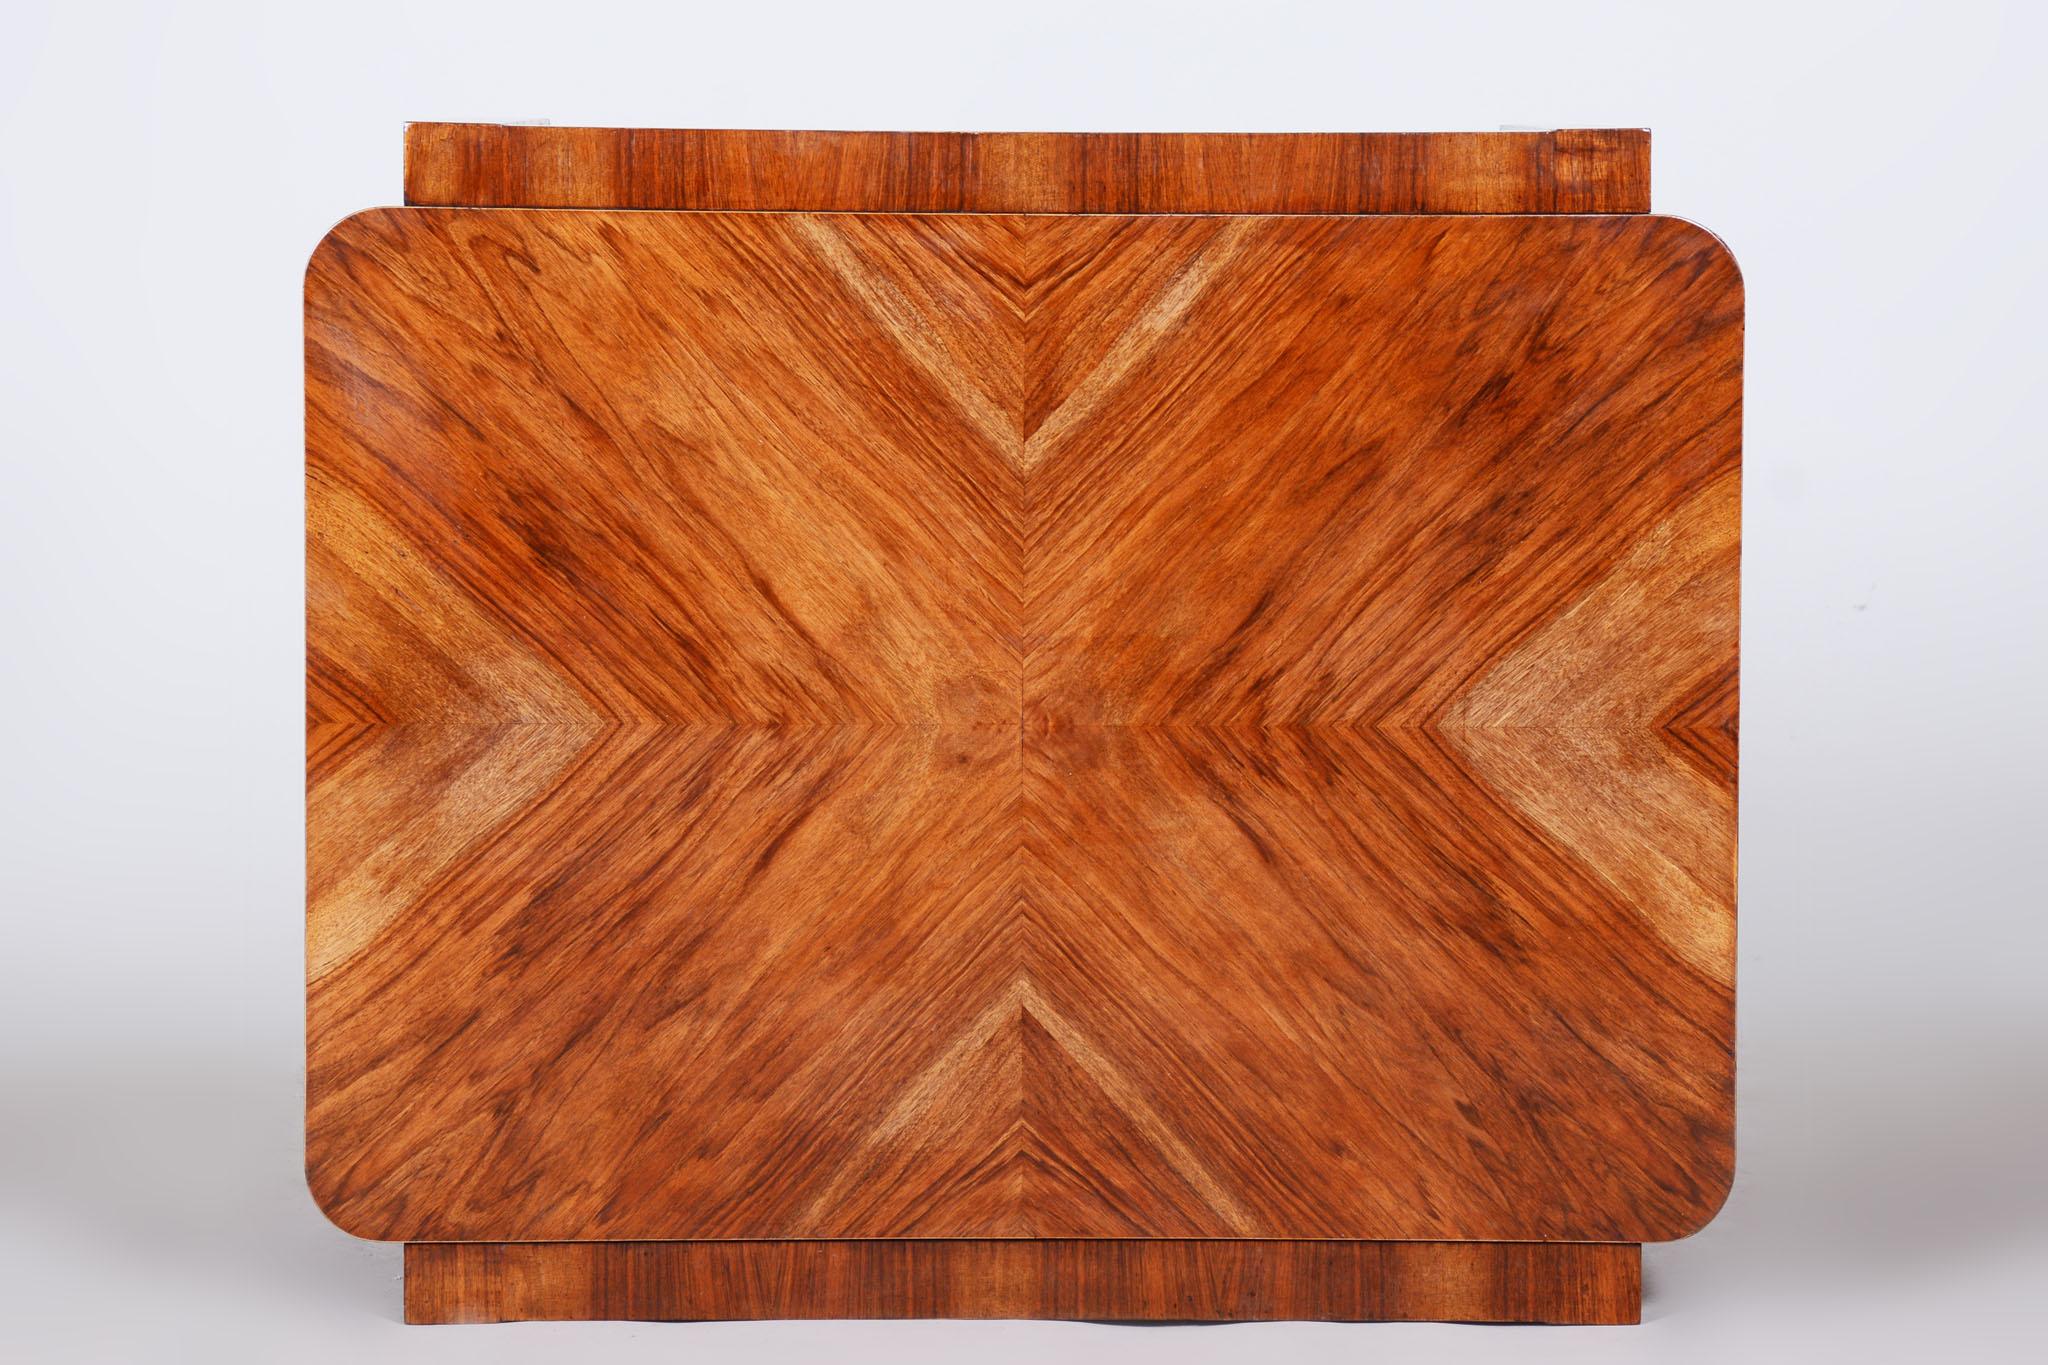 Mid-20th Century Small Art Deco Table, Made by Thonet, Walnut, Czechia, 1930s, Fully Restored For Sale